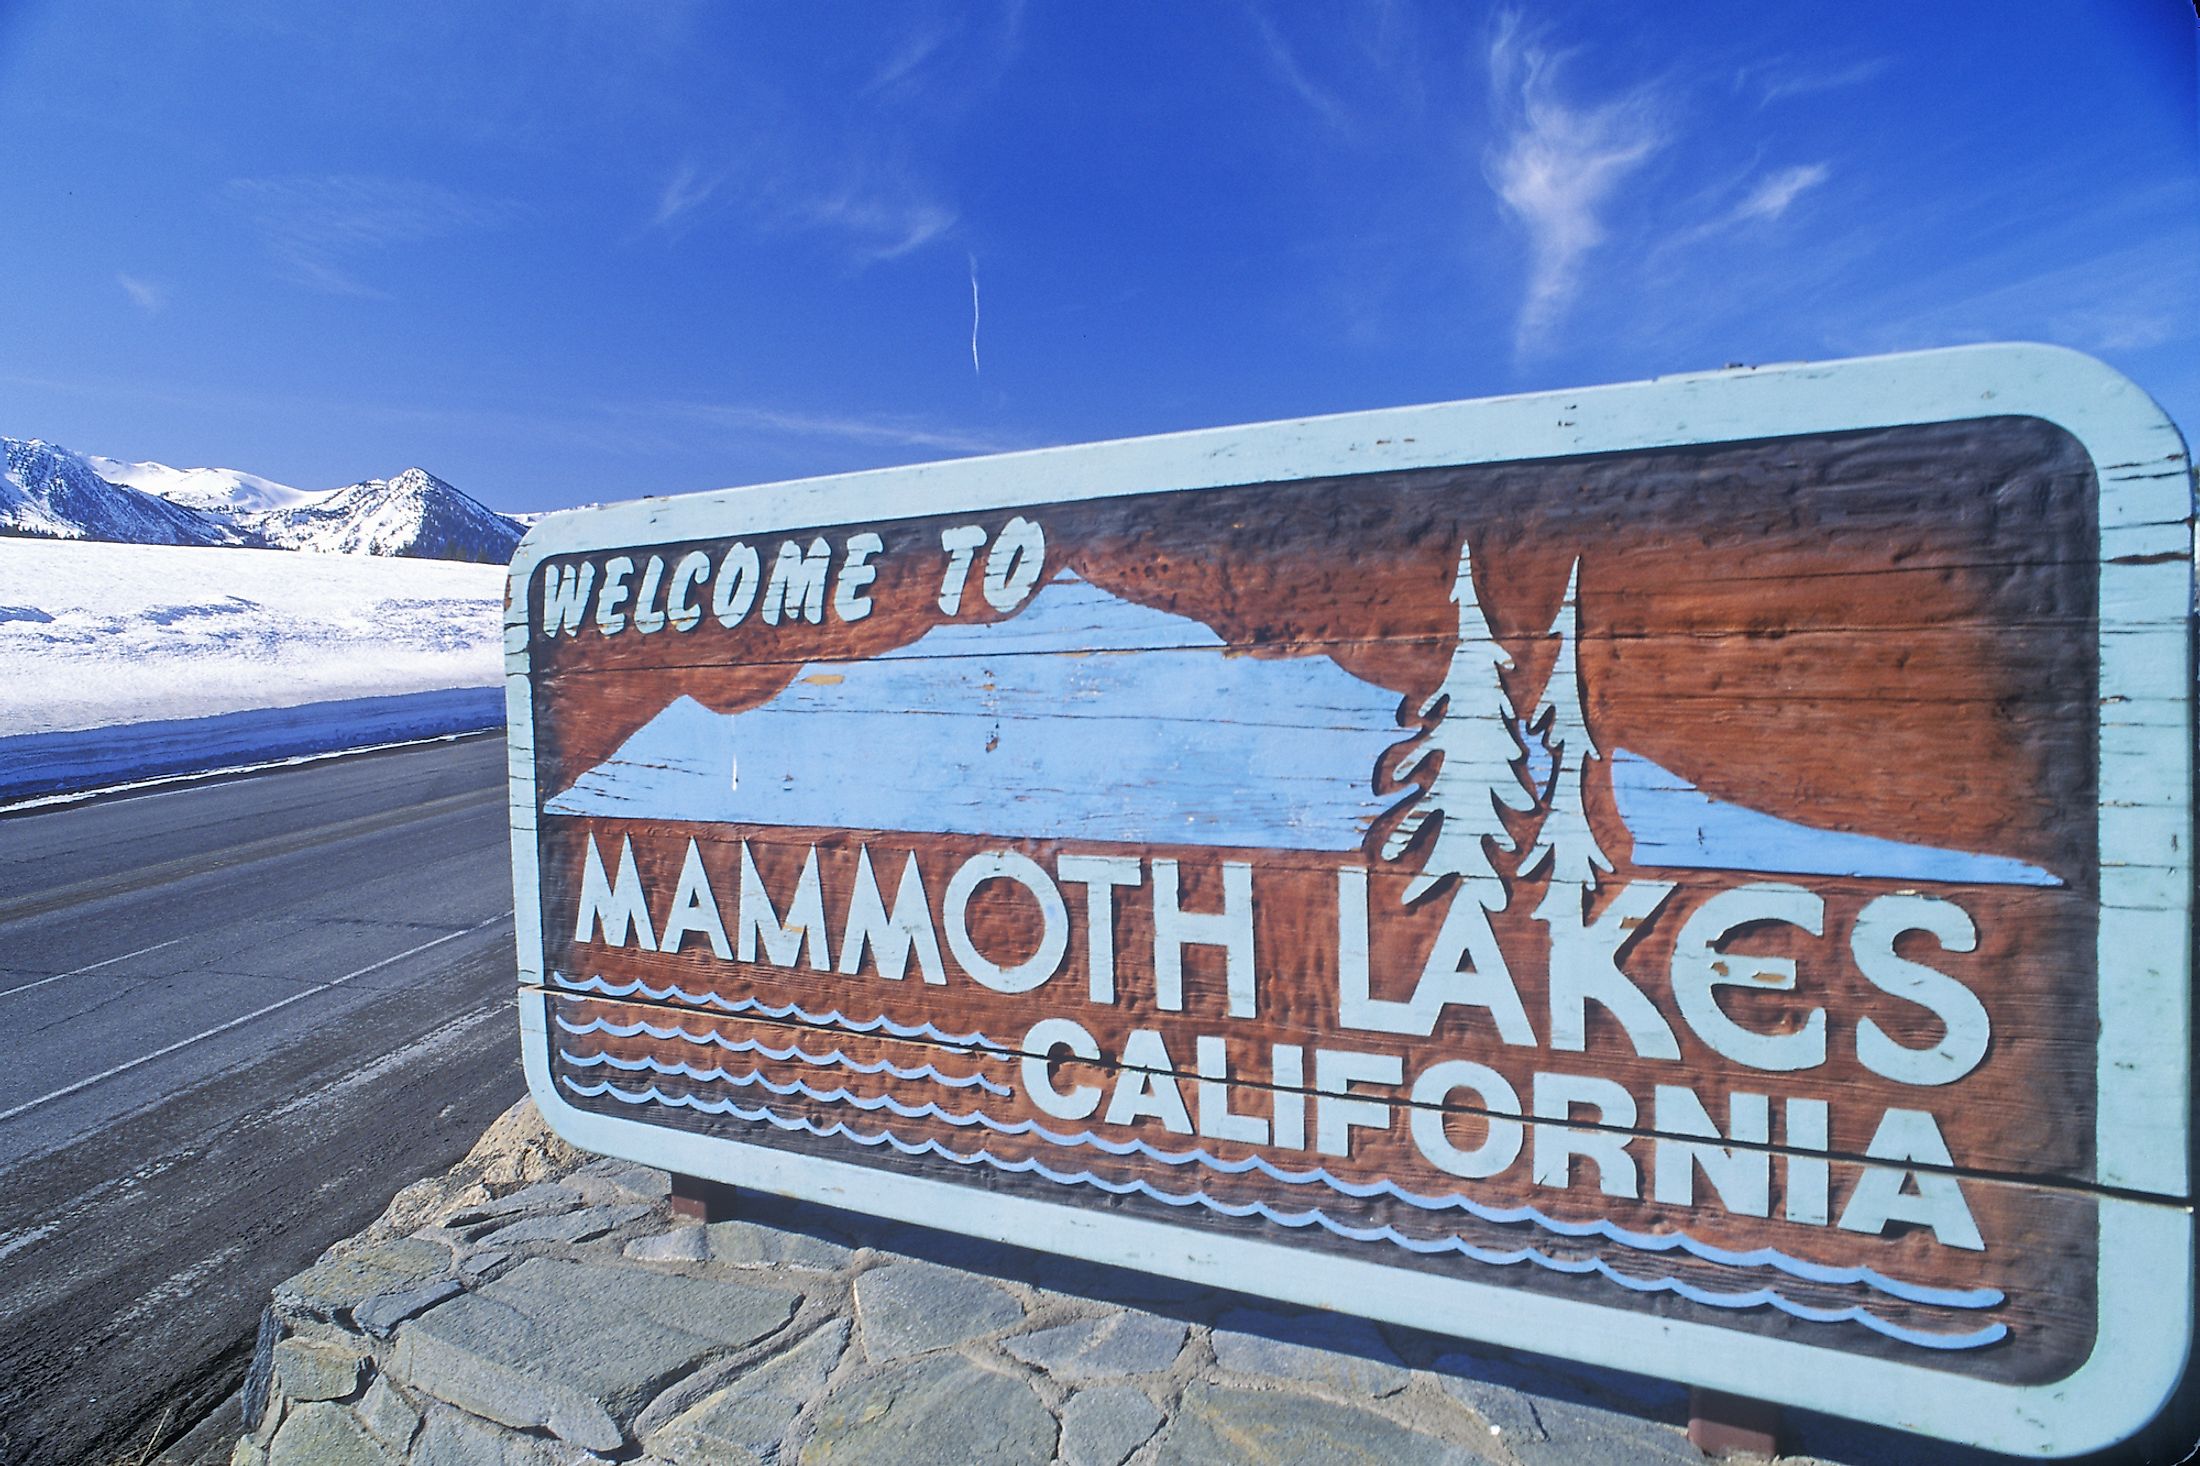 Welcome to Mammoth Lakes California sign. Editorial credit: Joseph Sohm / Shutterstock.com